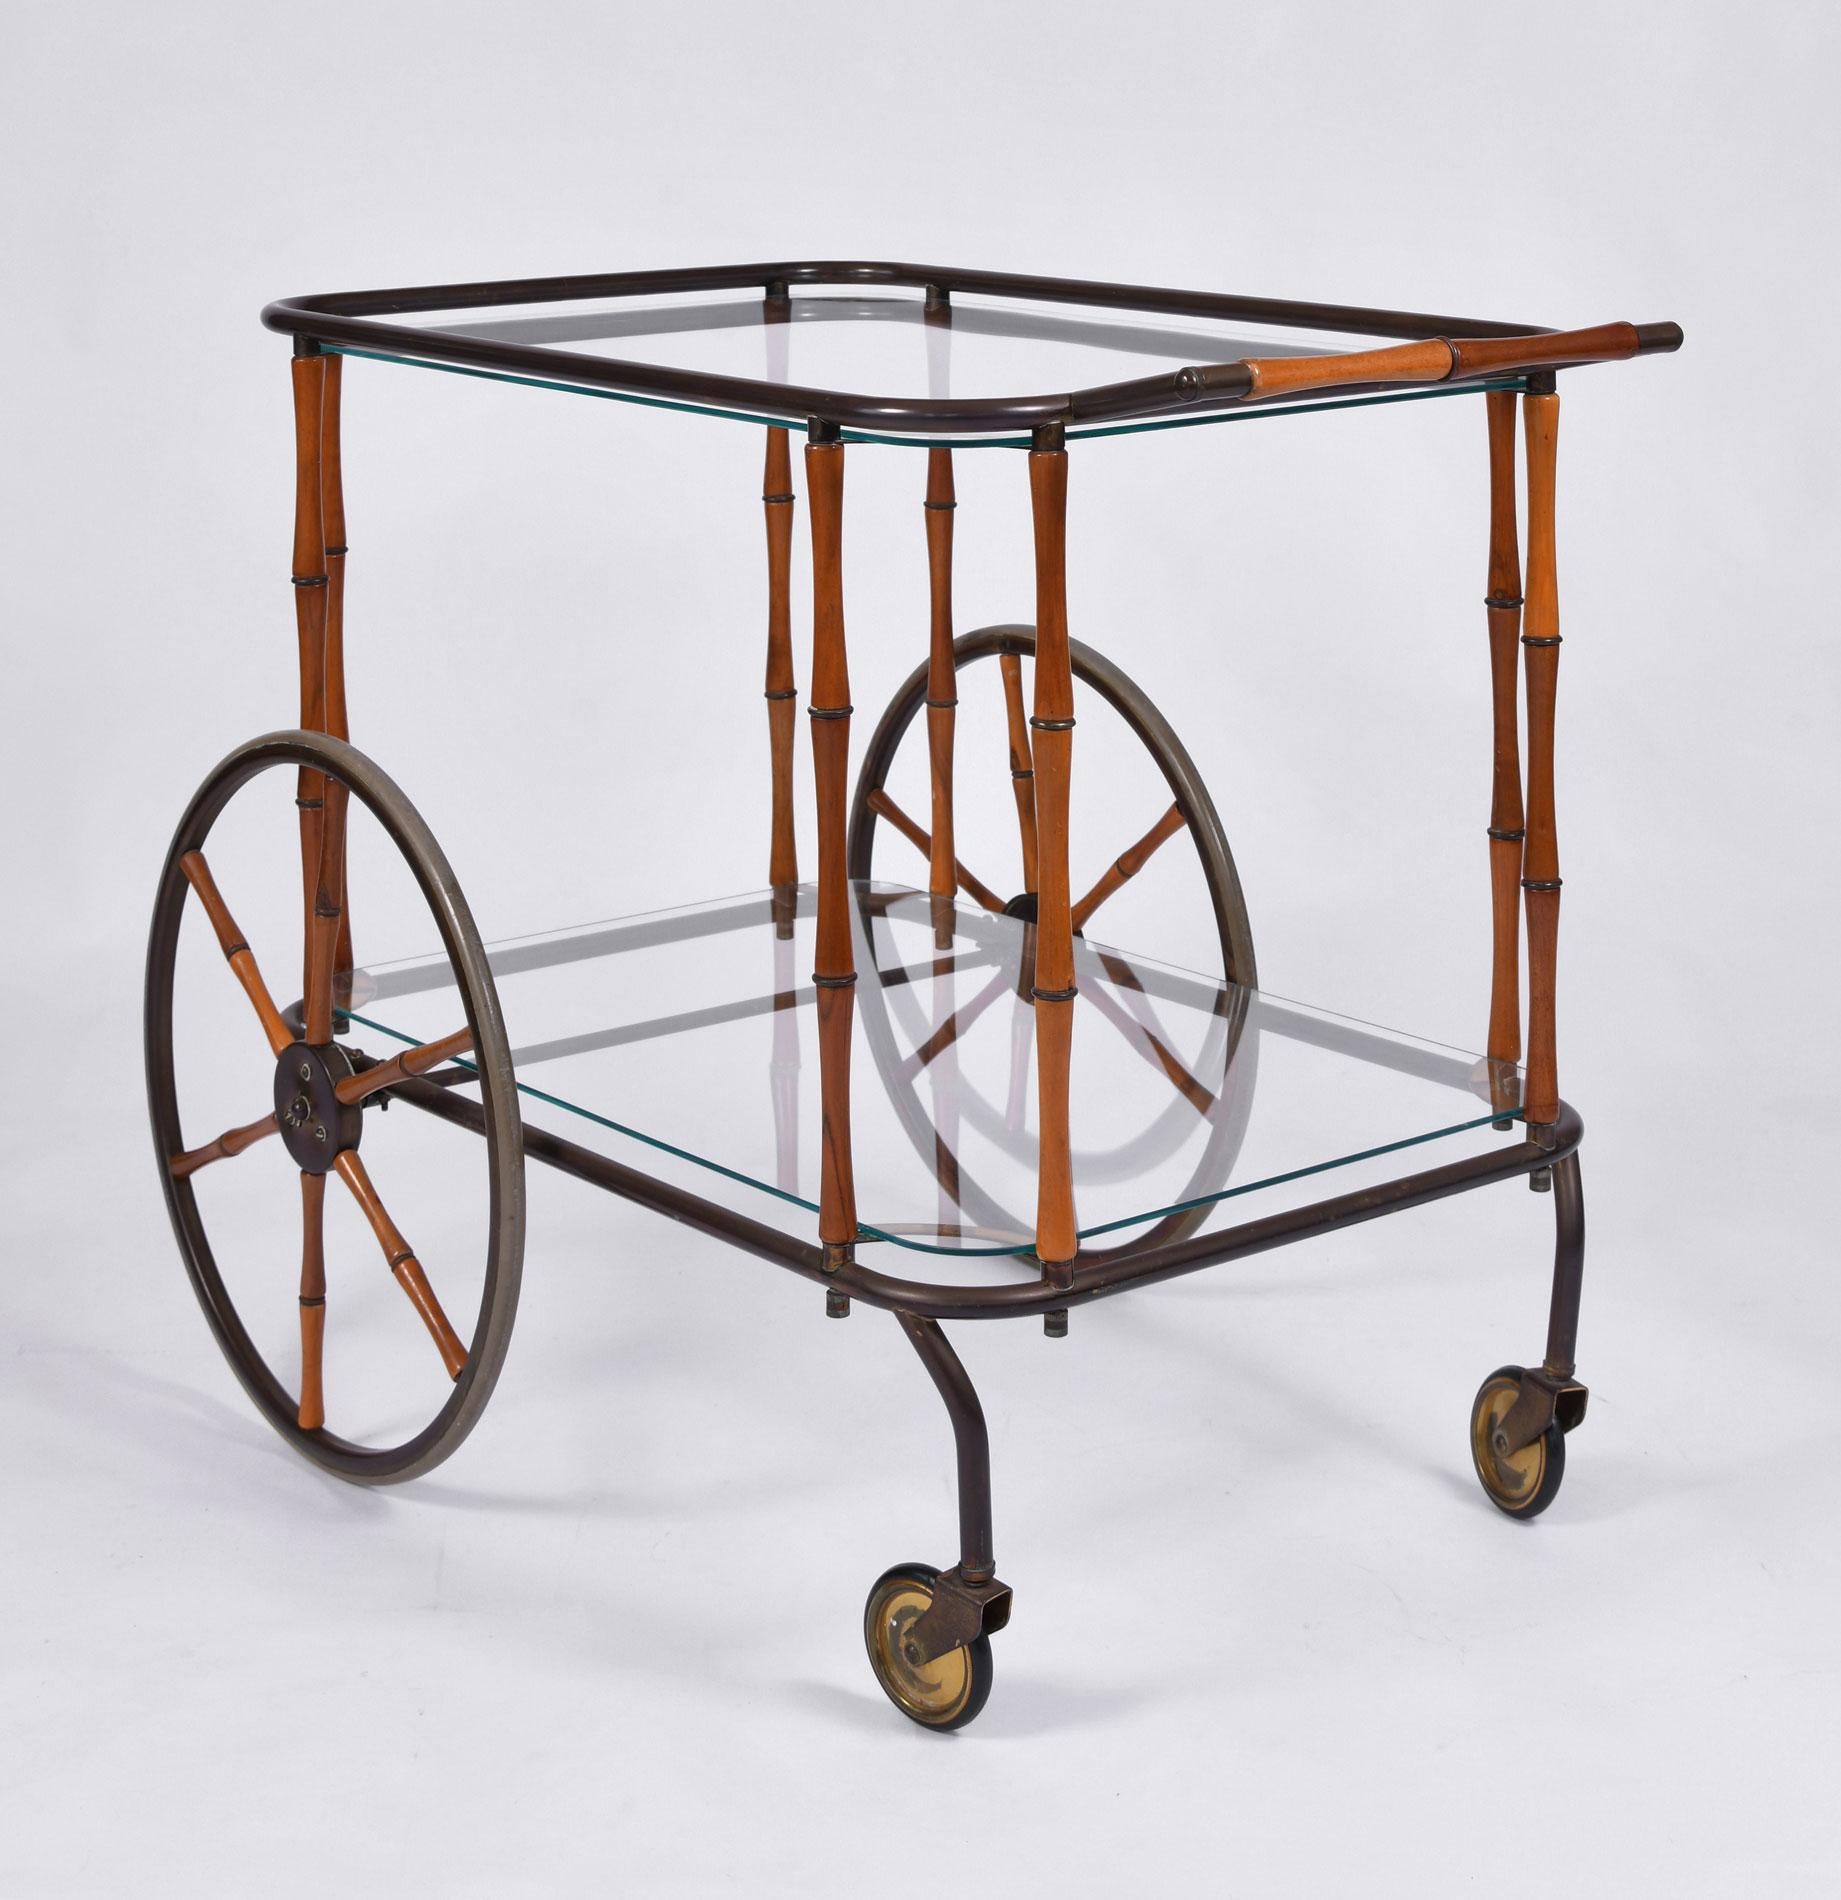 Well proportioned Hollywood Regency drinks trolley /bar cart with two glass shelves. Brass frame with bamboo handle, sides and decorative oversized wheels.
 